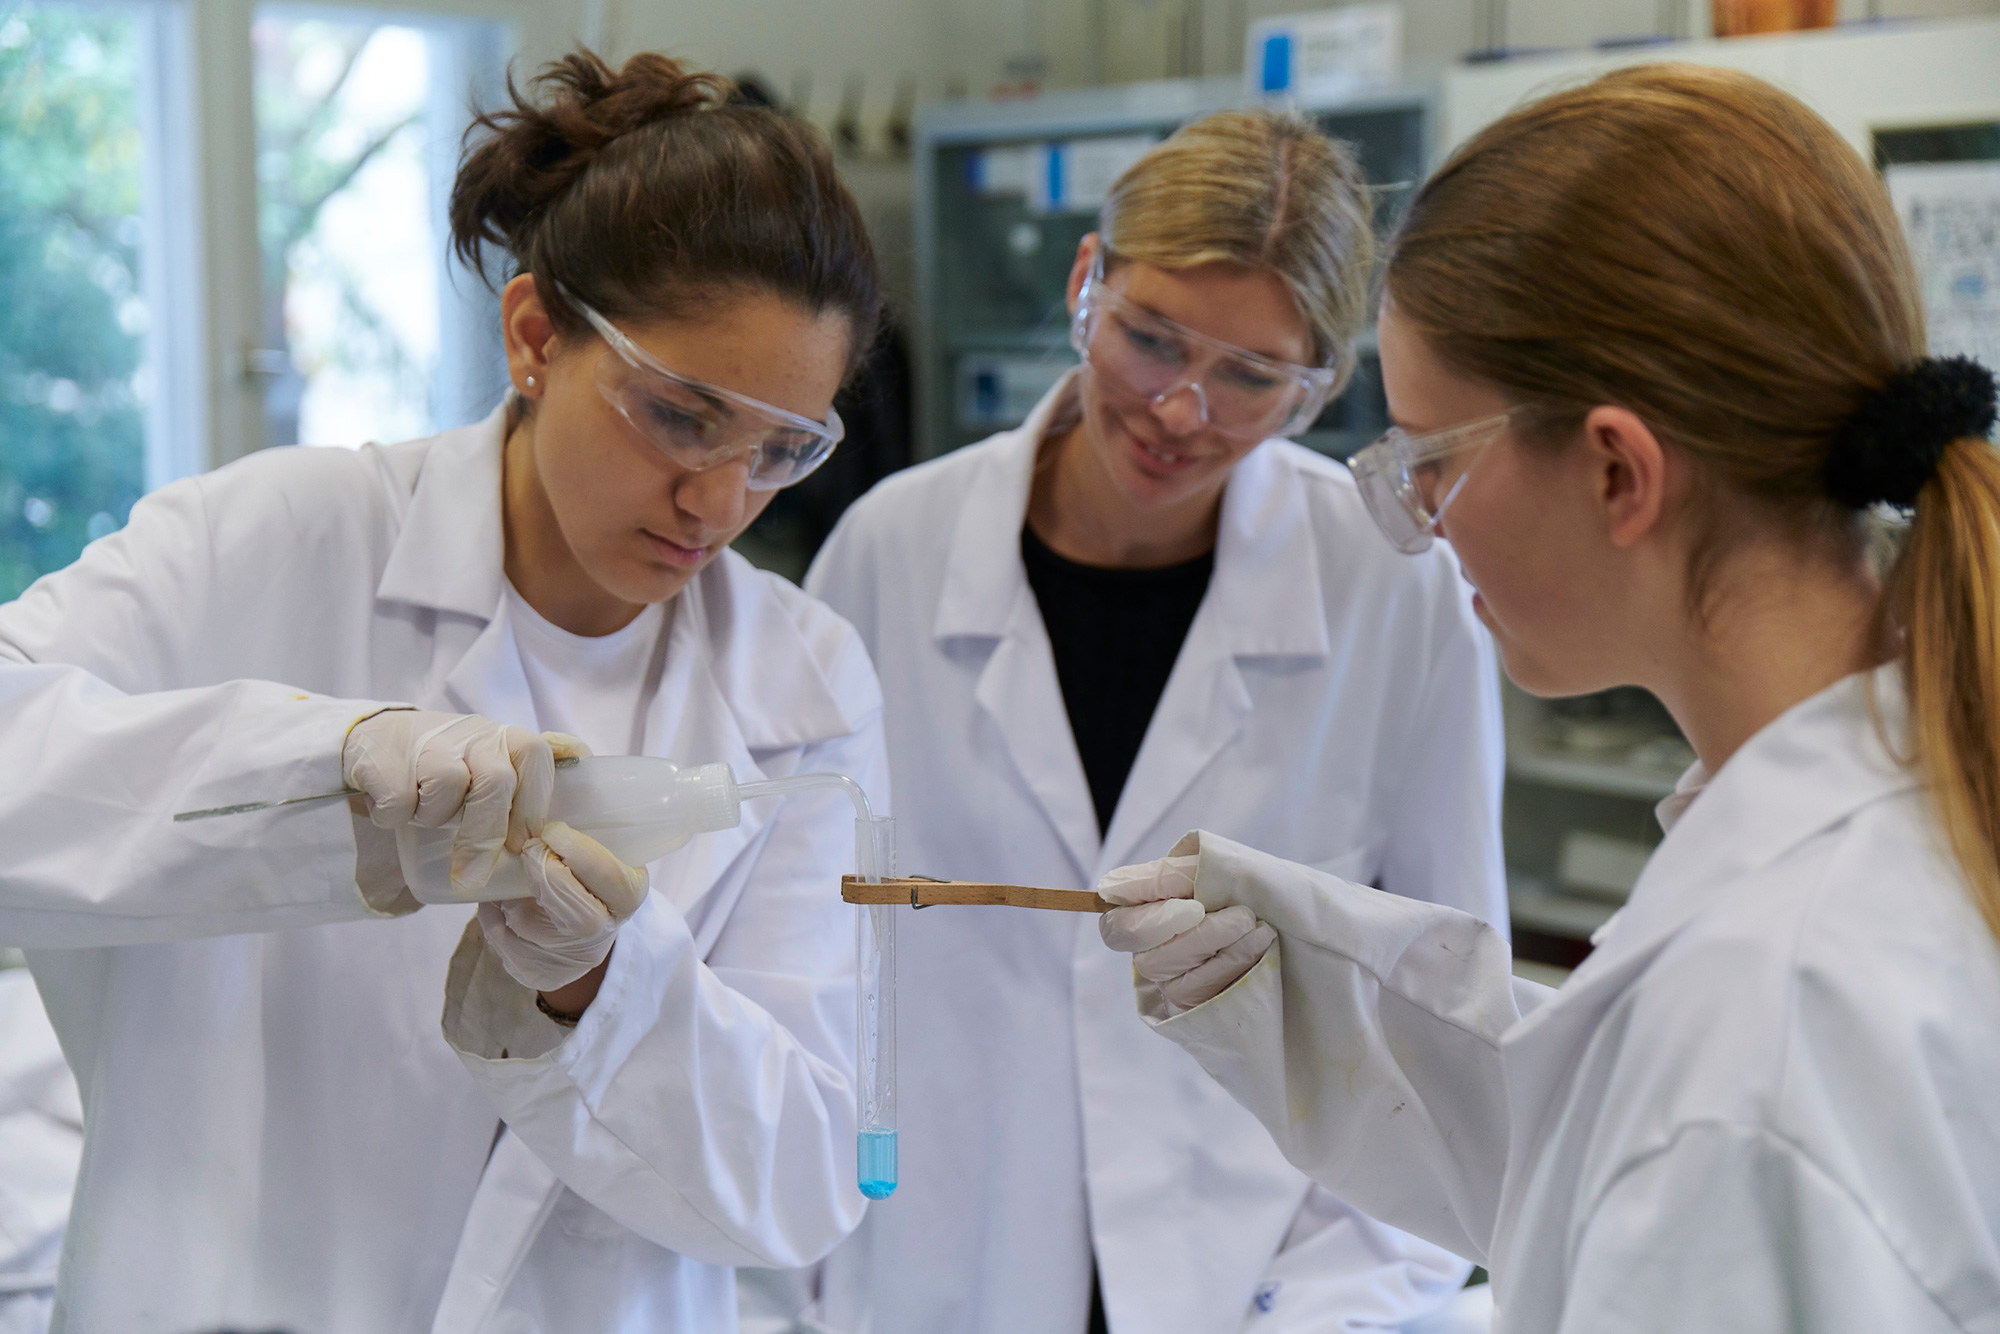 A student pours a liquid into a test tube, which another student holds with a wooden clamp. The teacher in the middle observes the process in the background.